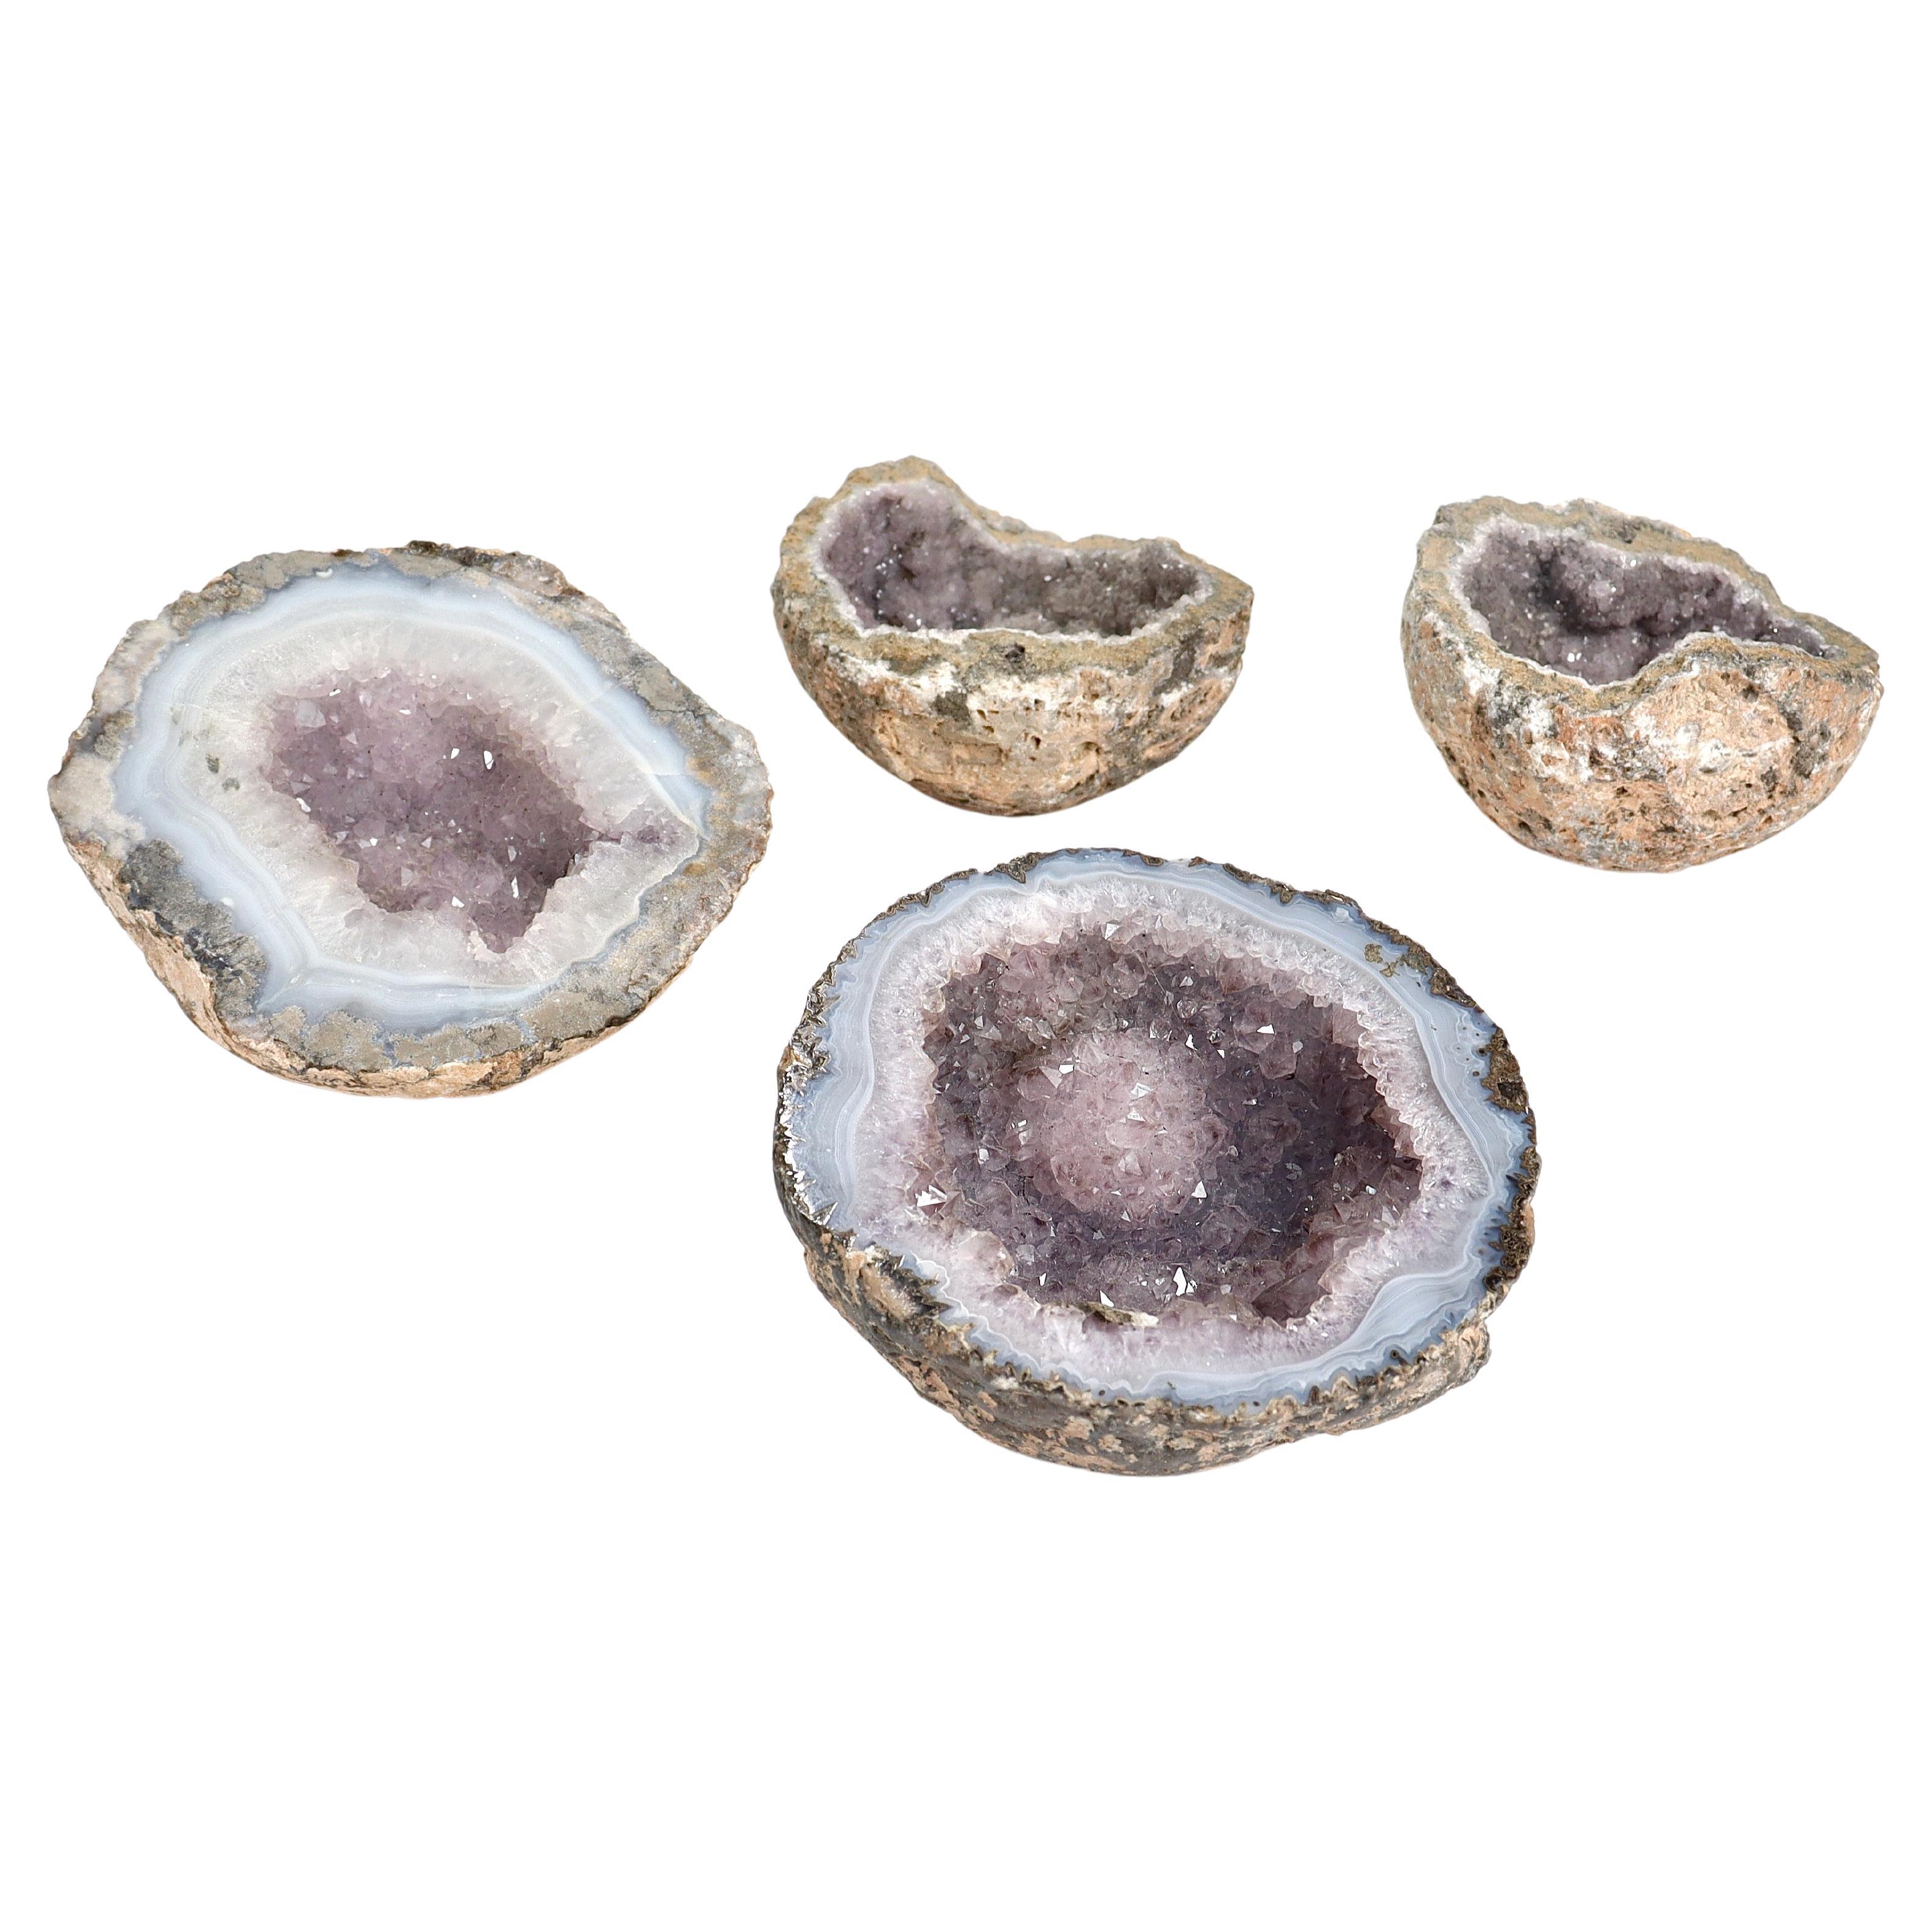 Group of 4 Amethyst Geodes For Sale